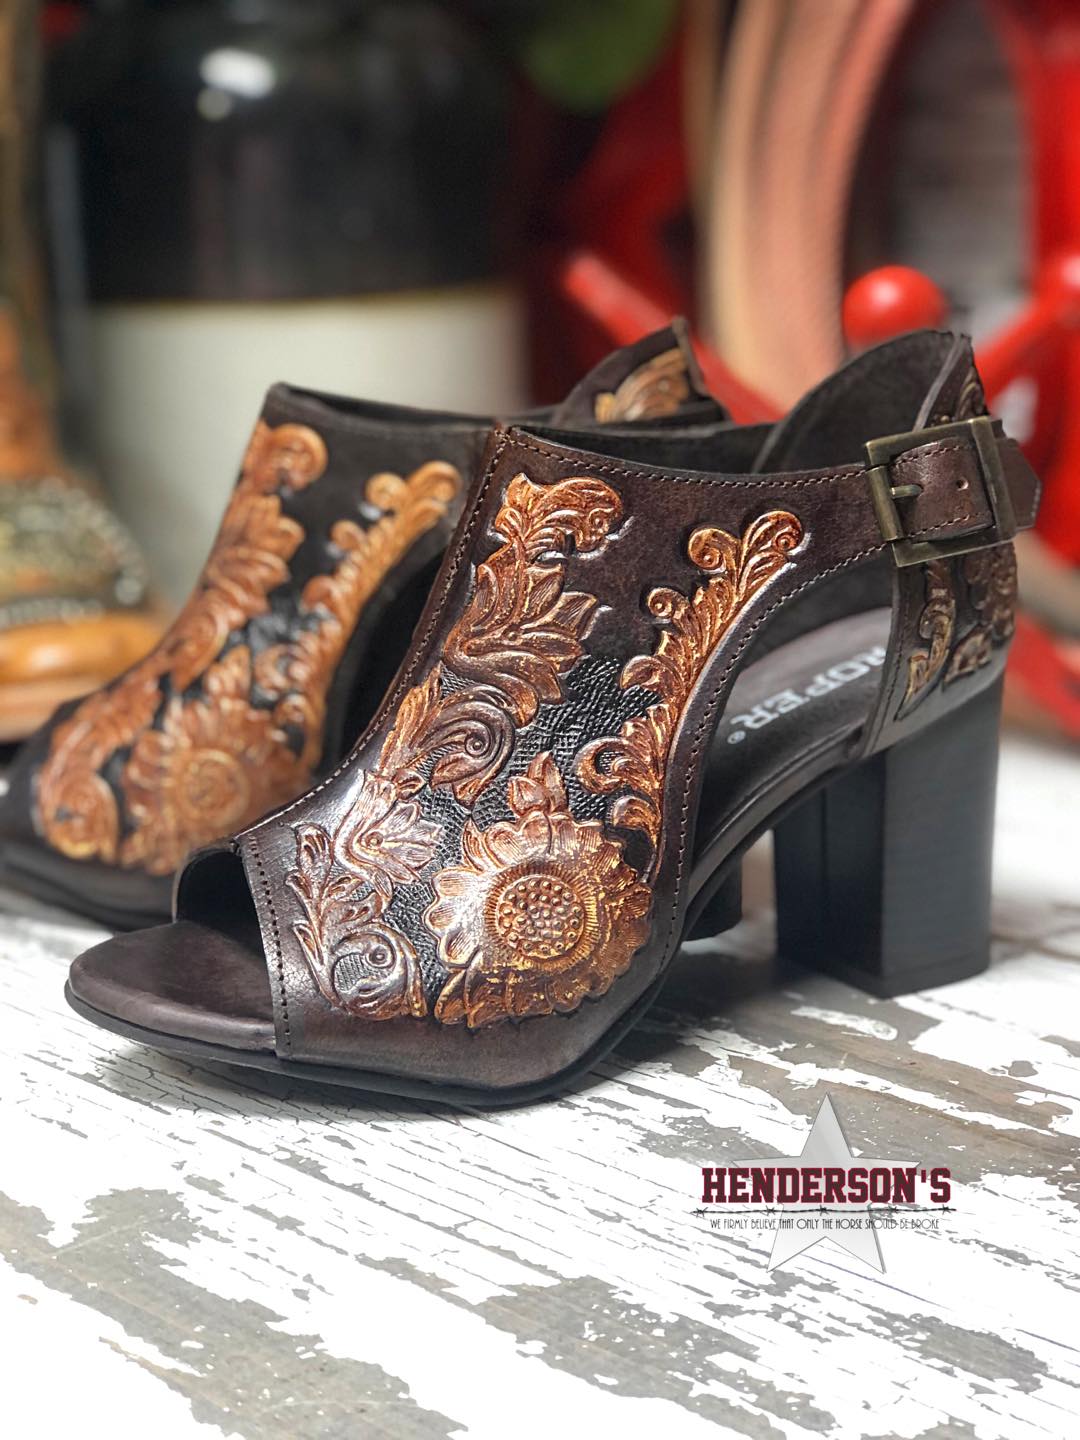 Retro Vintage Brown Western Knee High Heeled Boots For Women With  Embroidery, Chunky Heel, Pointed Toe, Platform, And Block Heels Fashionable  Knee High Heeled Boots Style #230801 From Qiyuan08, $58.16 | DHgate.Com